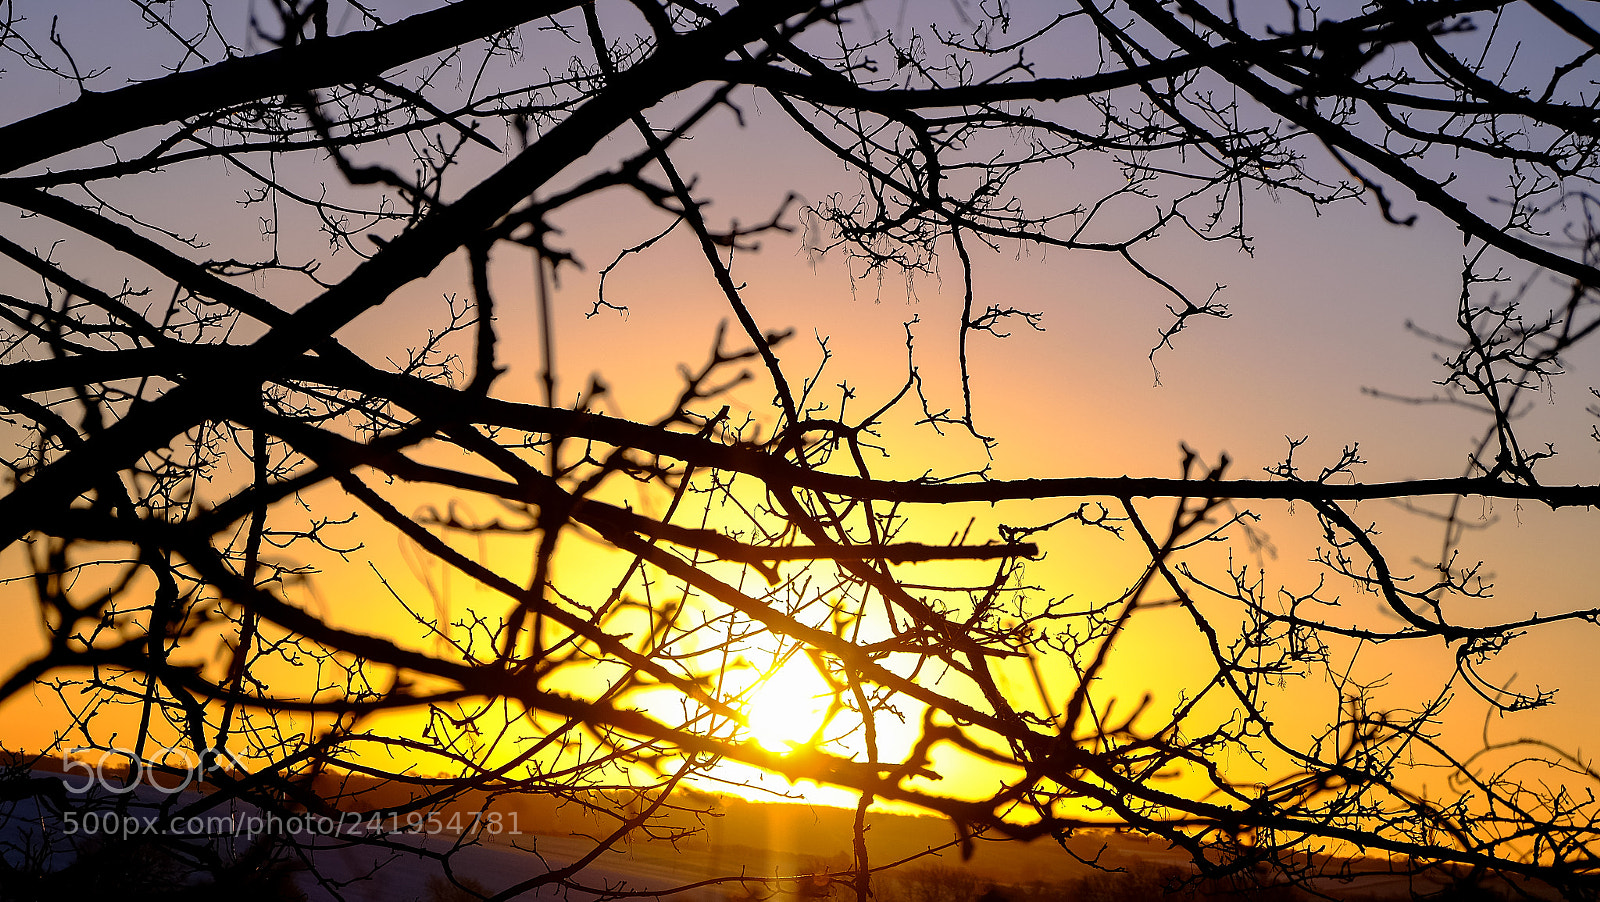 Fujifilm X-T10 sample photo. Behind the branches photography